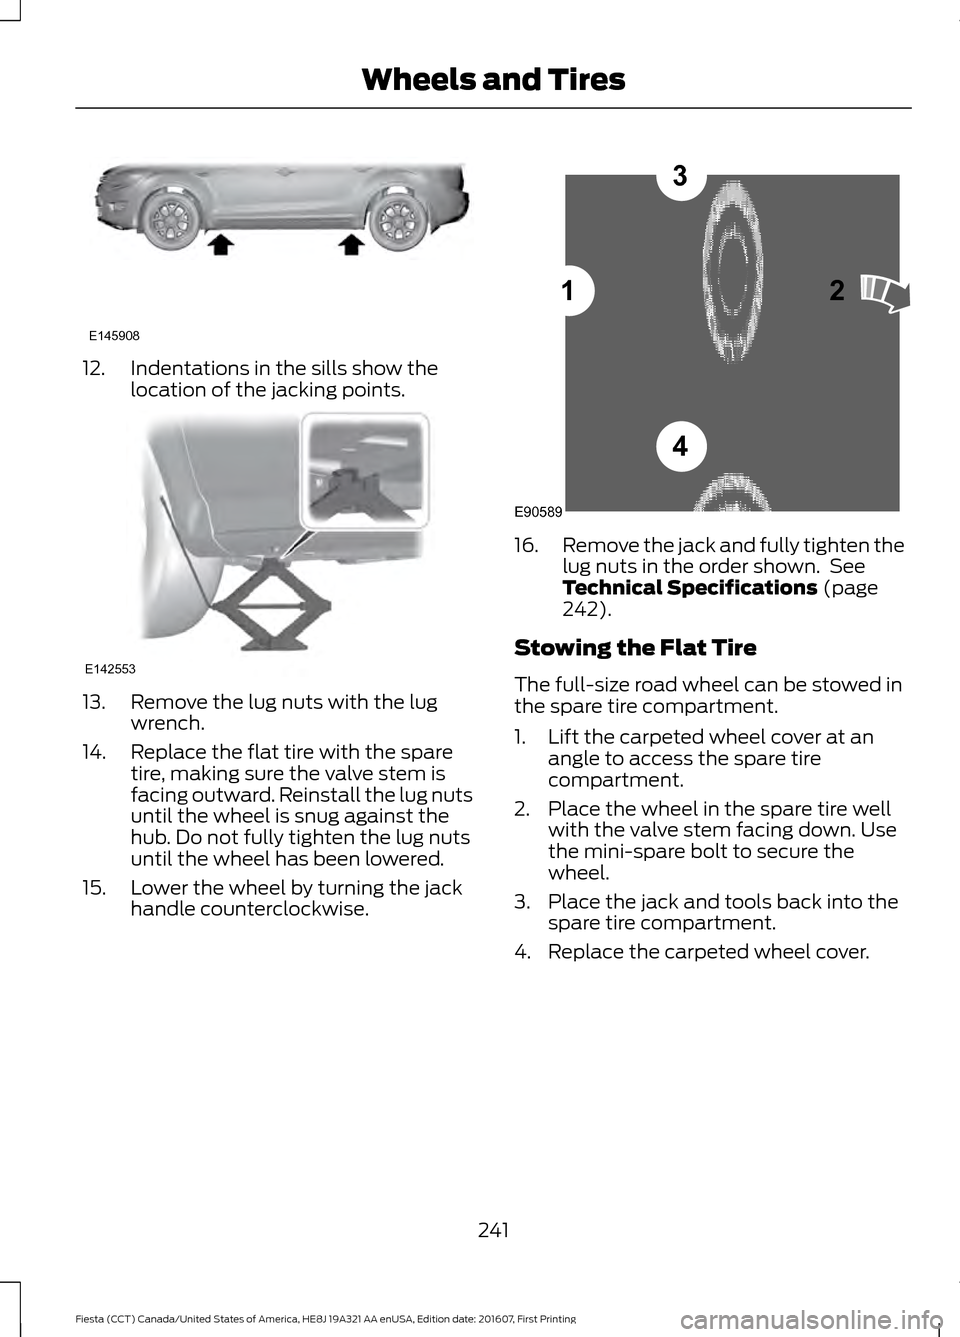 FORD FIESTA 2017 6.G Owners Manual 12. Indentations in the sills show the
location of the jacking points. 13. Remove the lug nuts with the lug
wrench.
14. Replace the flat tire with the spare tire, making sure the valve stem is
facing 